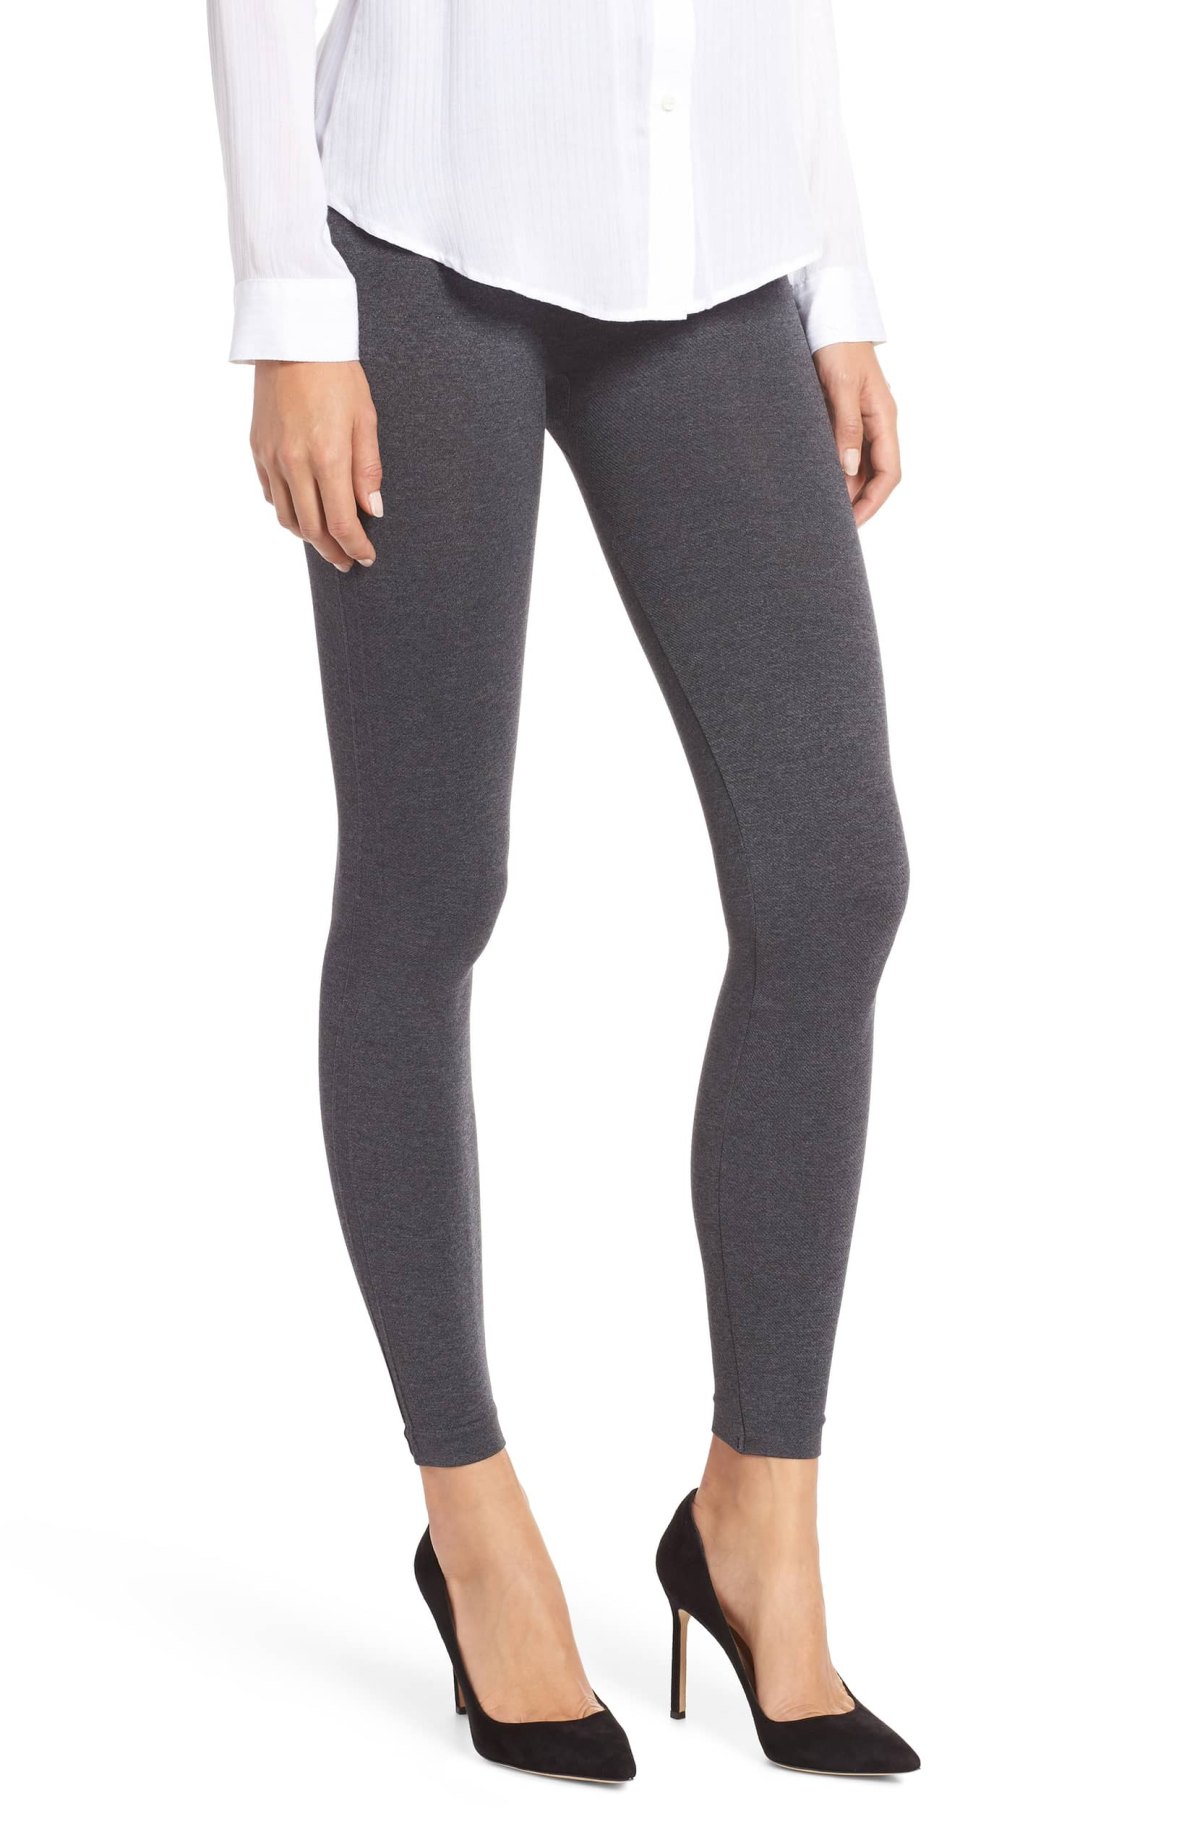 These Flattering Spanx Leggings Will Have All Eyes on You | Us Weekly